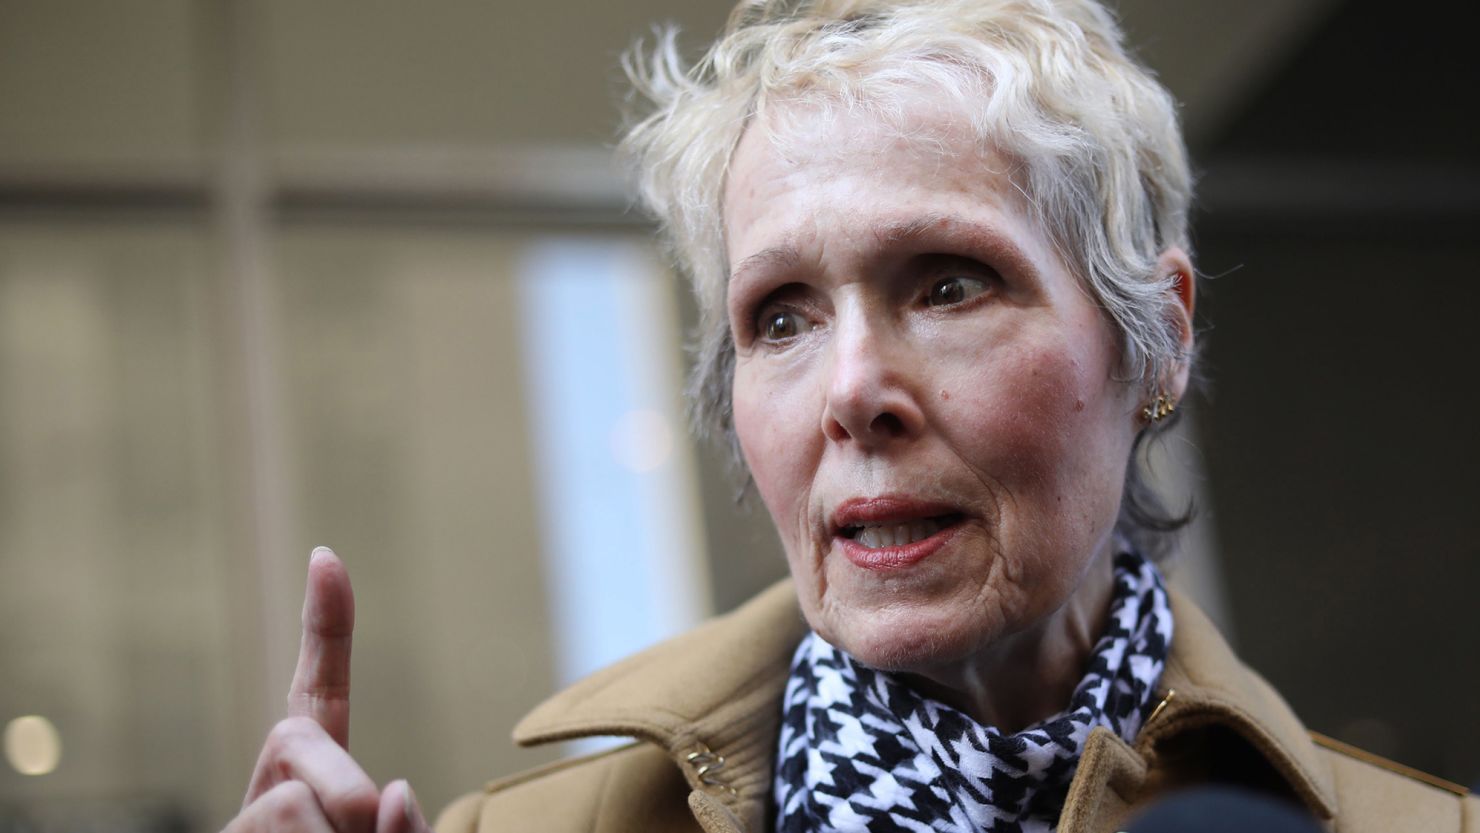 E. Jean Carroll outside State Supreme Court on March 4, 2020 in New York. Caroll is suing Donald Trump for defamation.